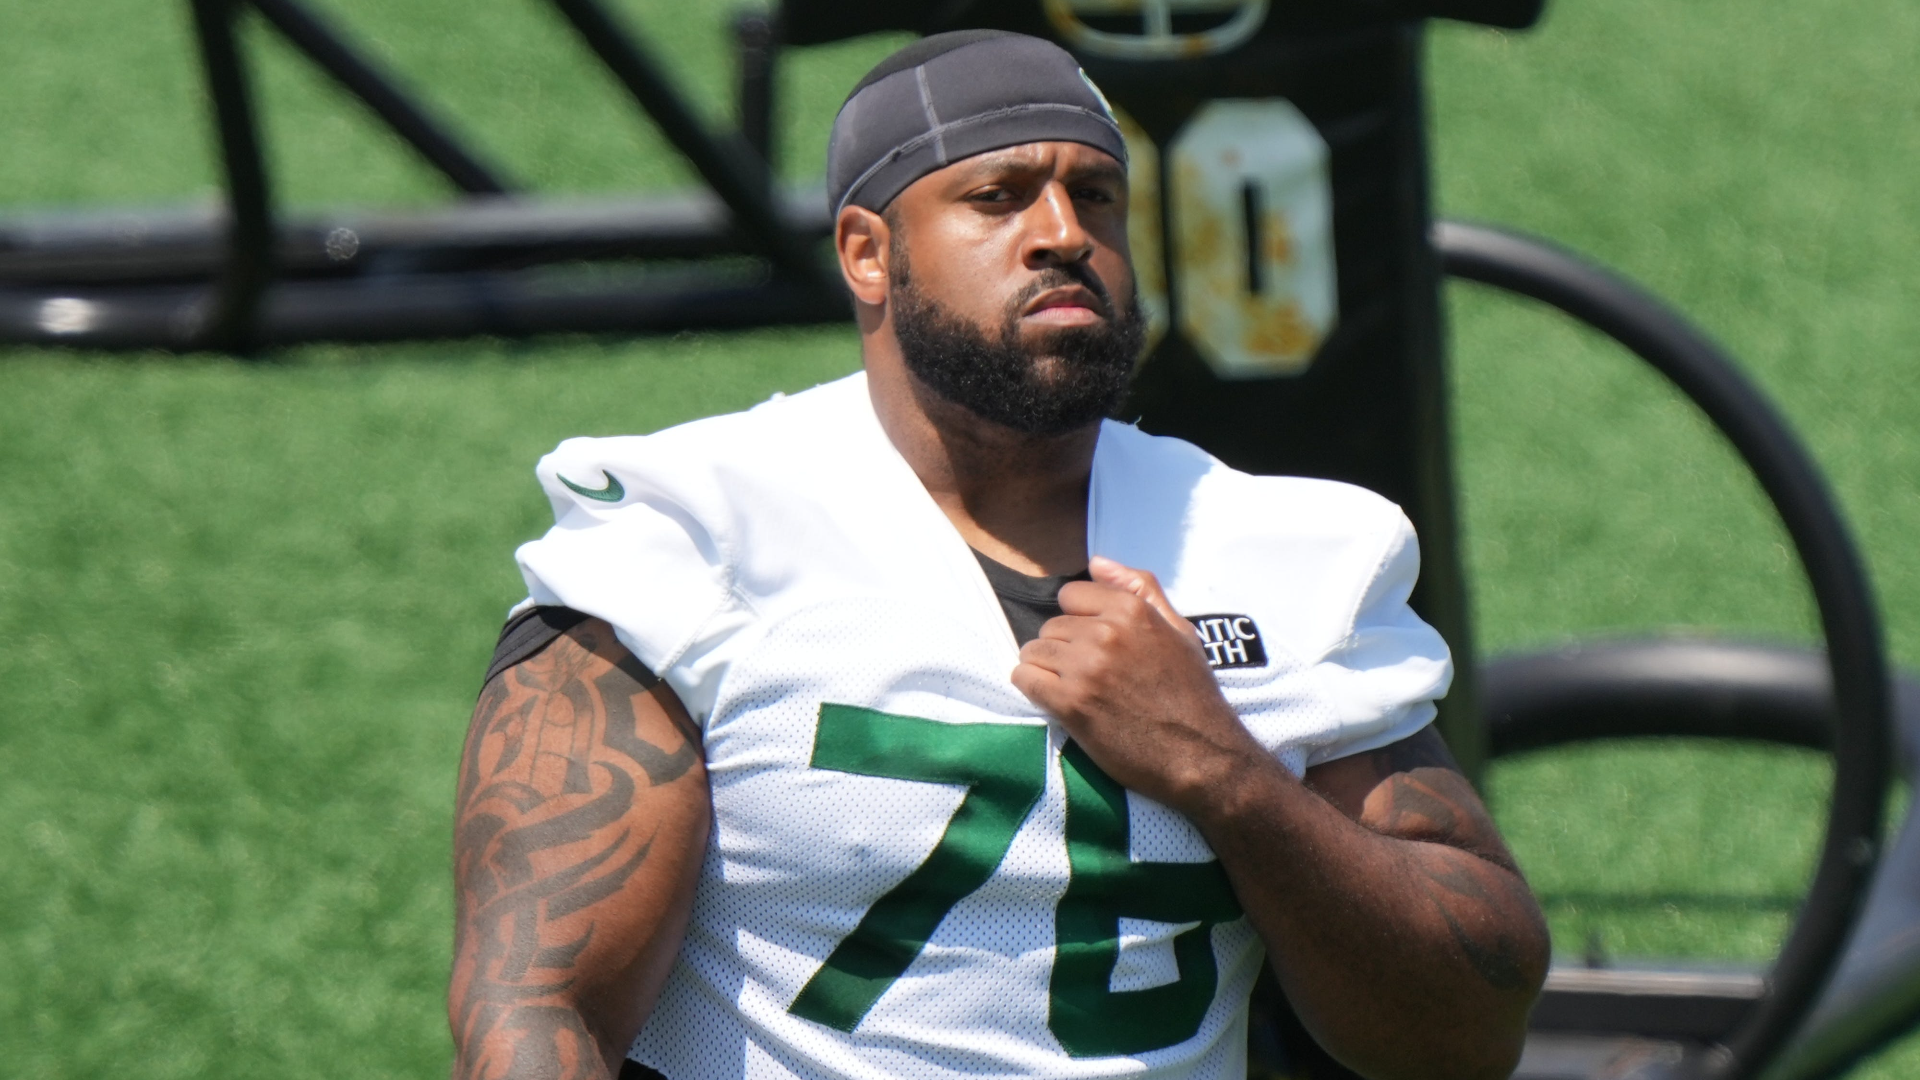 Robert Saleh Defends Jets’ Left Tackle After Aaron Rodgers’ Injury